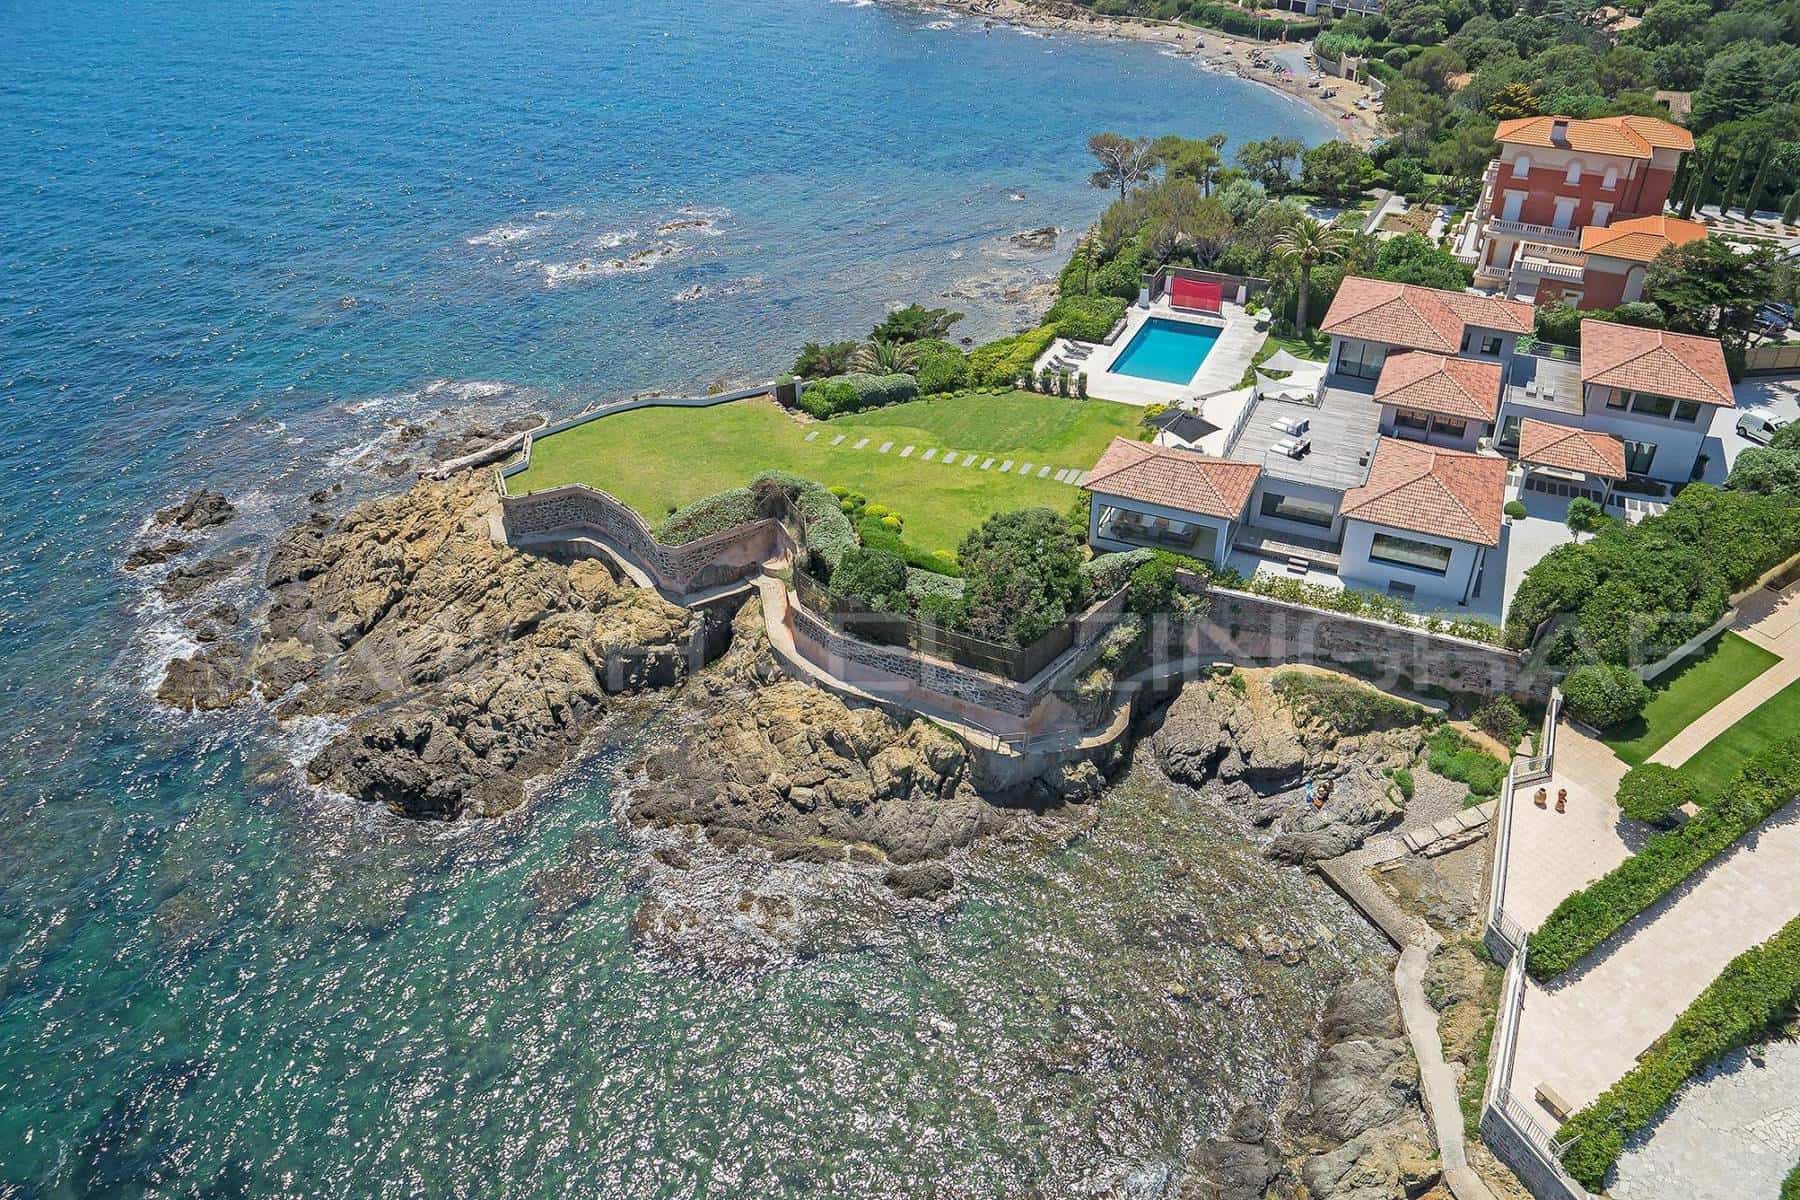 Fabulous property in Saint Aygulf, minutes away from Cannes